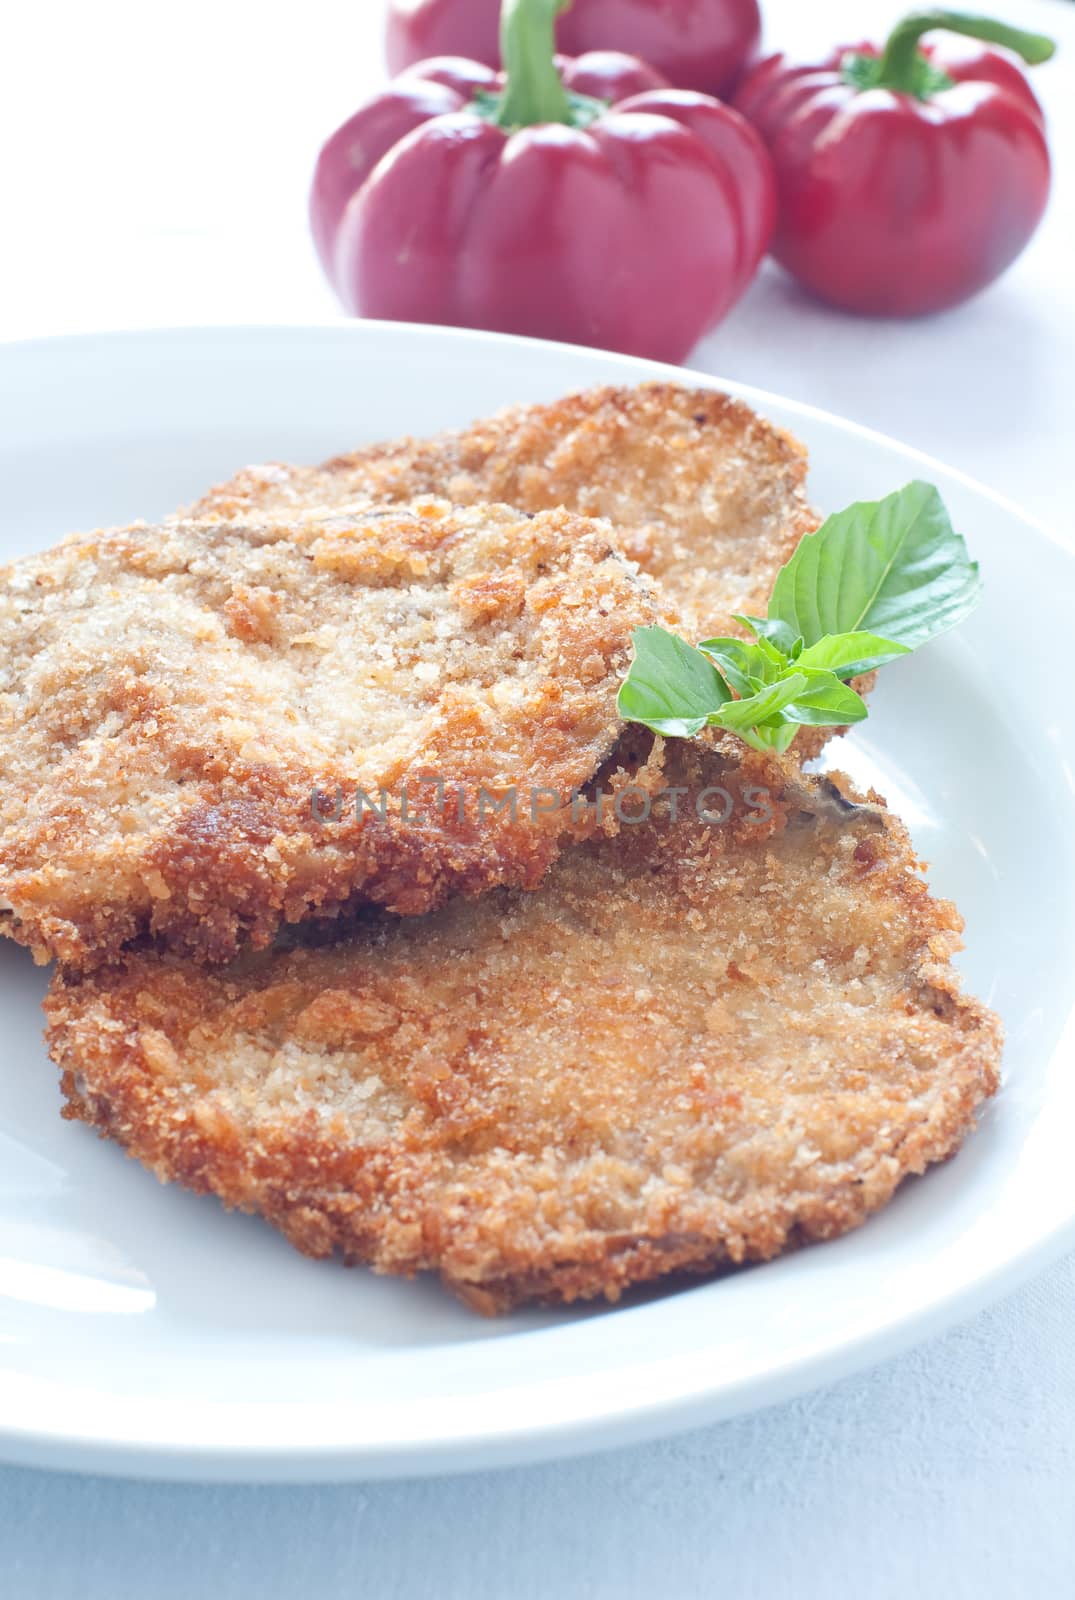 Eggplant slices breaded and fried, italy